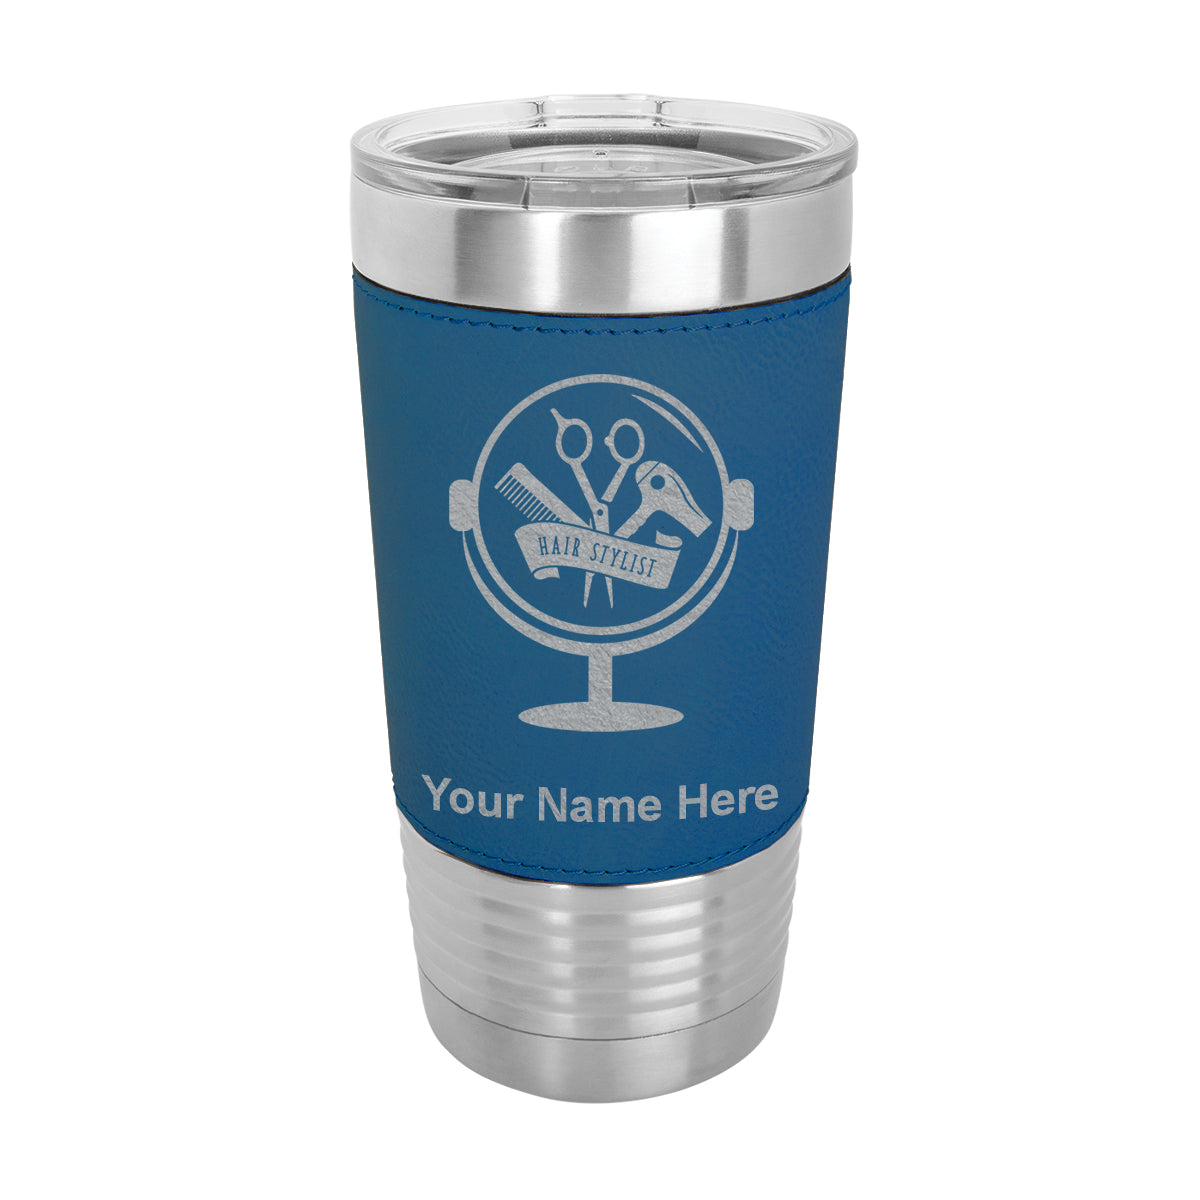 20oz Faux Leather Tumbler Mug, Hair Stylist, Personalized Engraving Included - LaserGram Custom Engraved Gifts